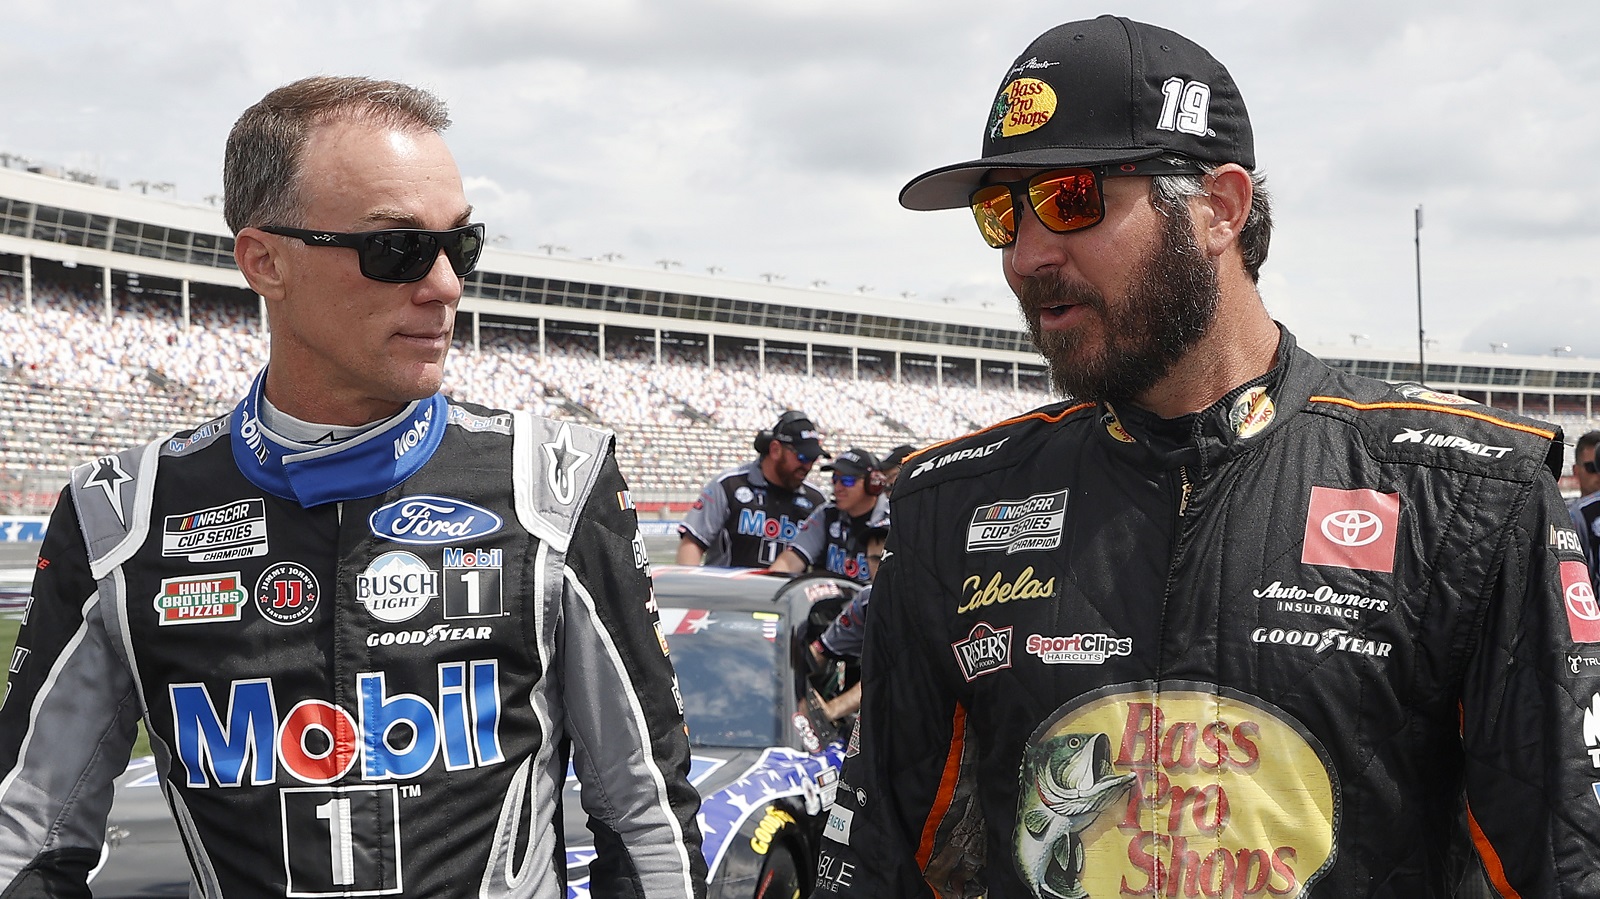 Kevin Harvick and Martin Truex Jr. walk the grid during qualifying for the NASCAR Cup Series Coca-Cola 600 at Charlotte Motor Speedway on May 29, 2021.